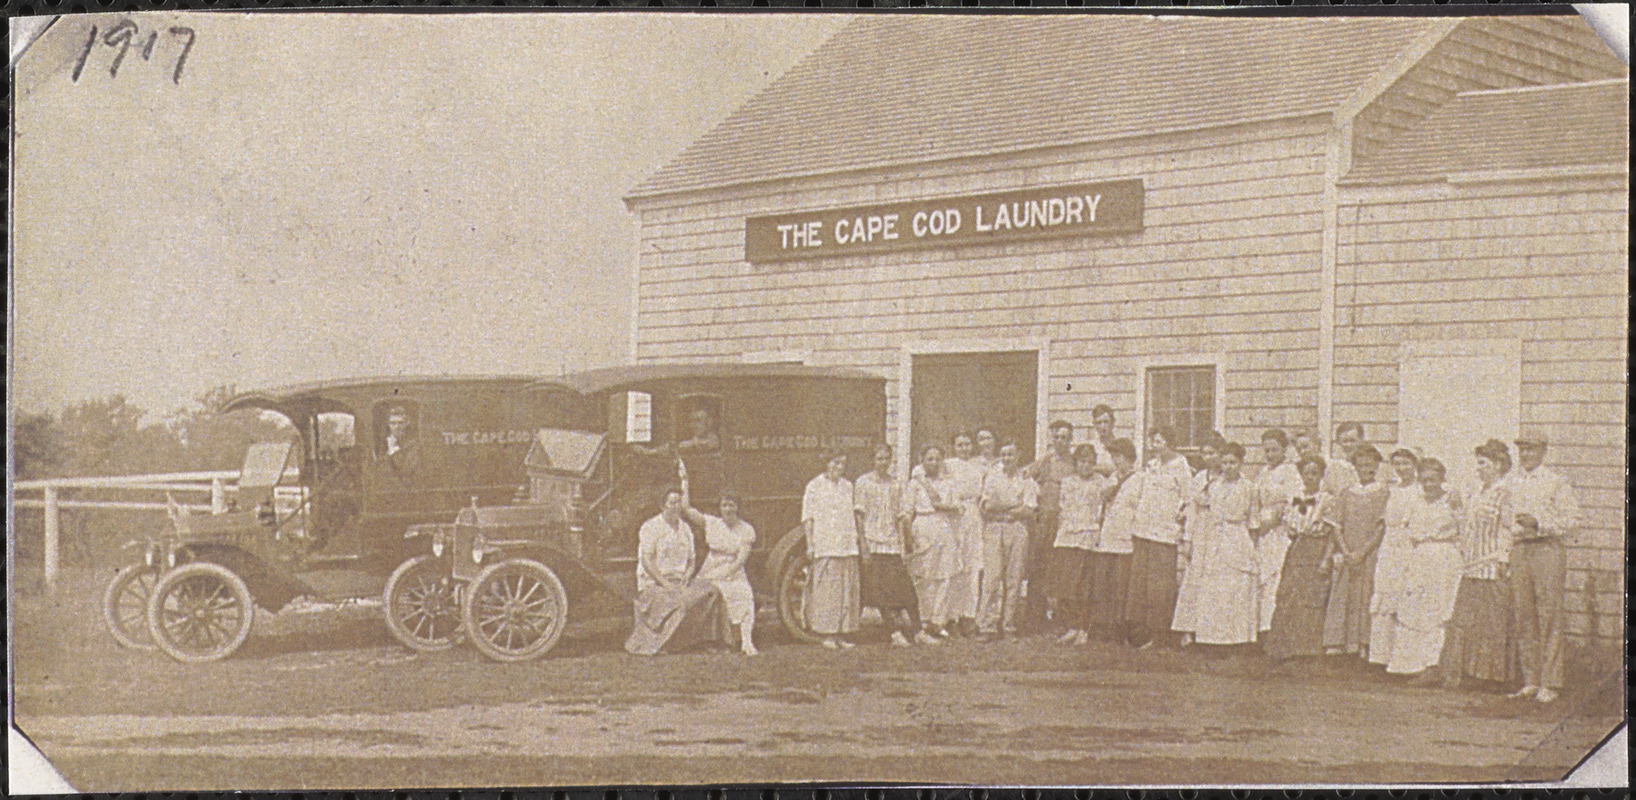 The Cape Cod Laundry, West Yarmouth, Mass.